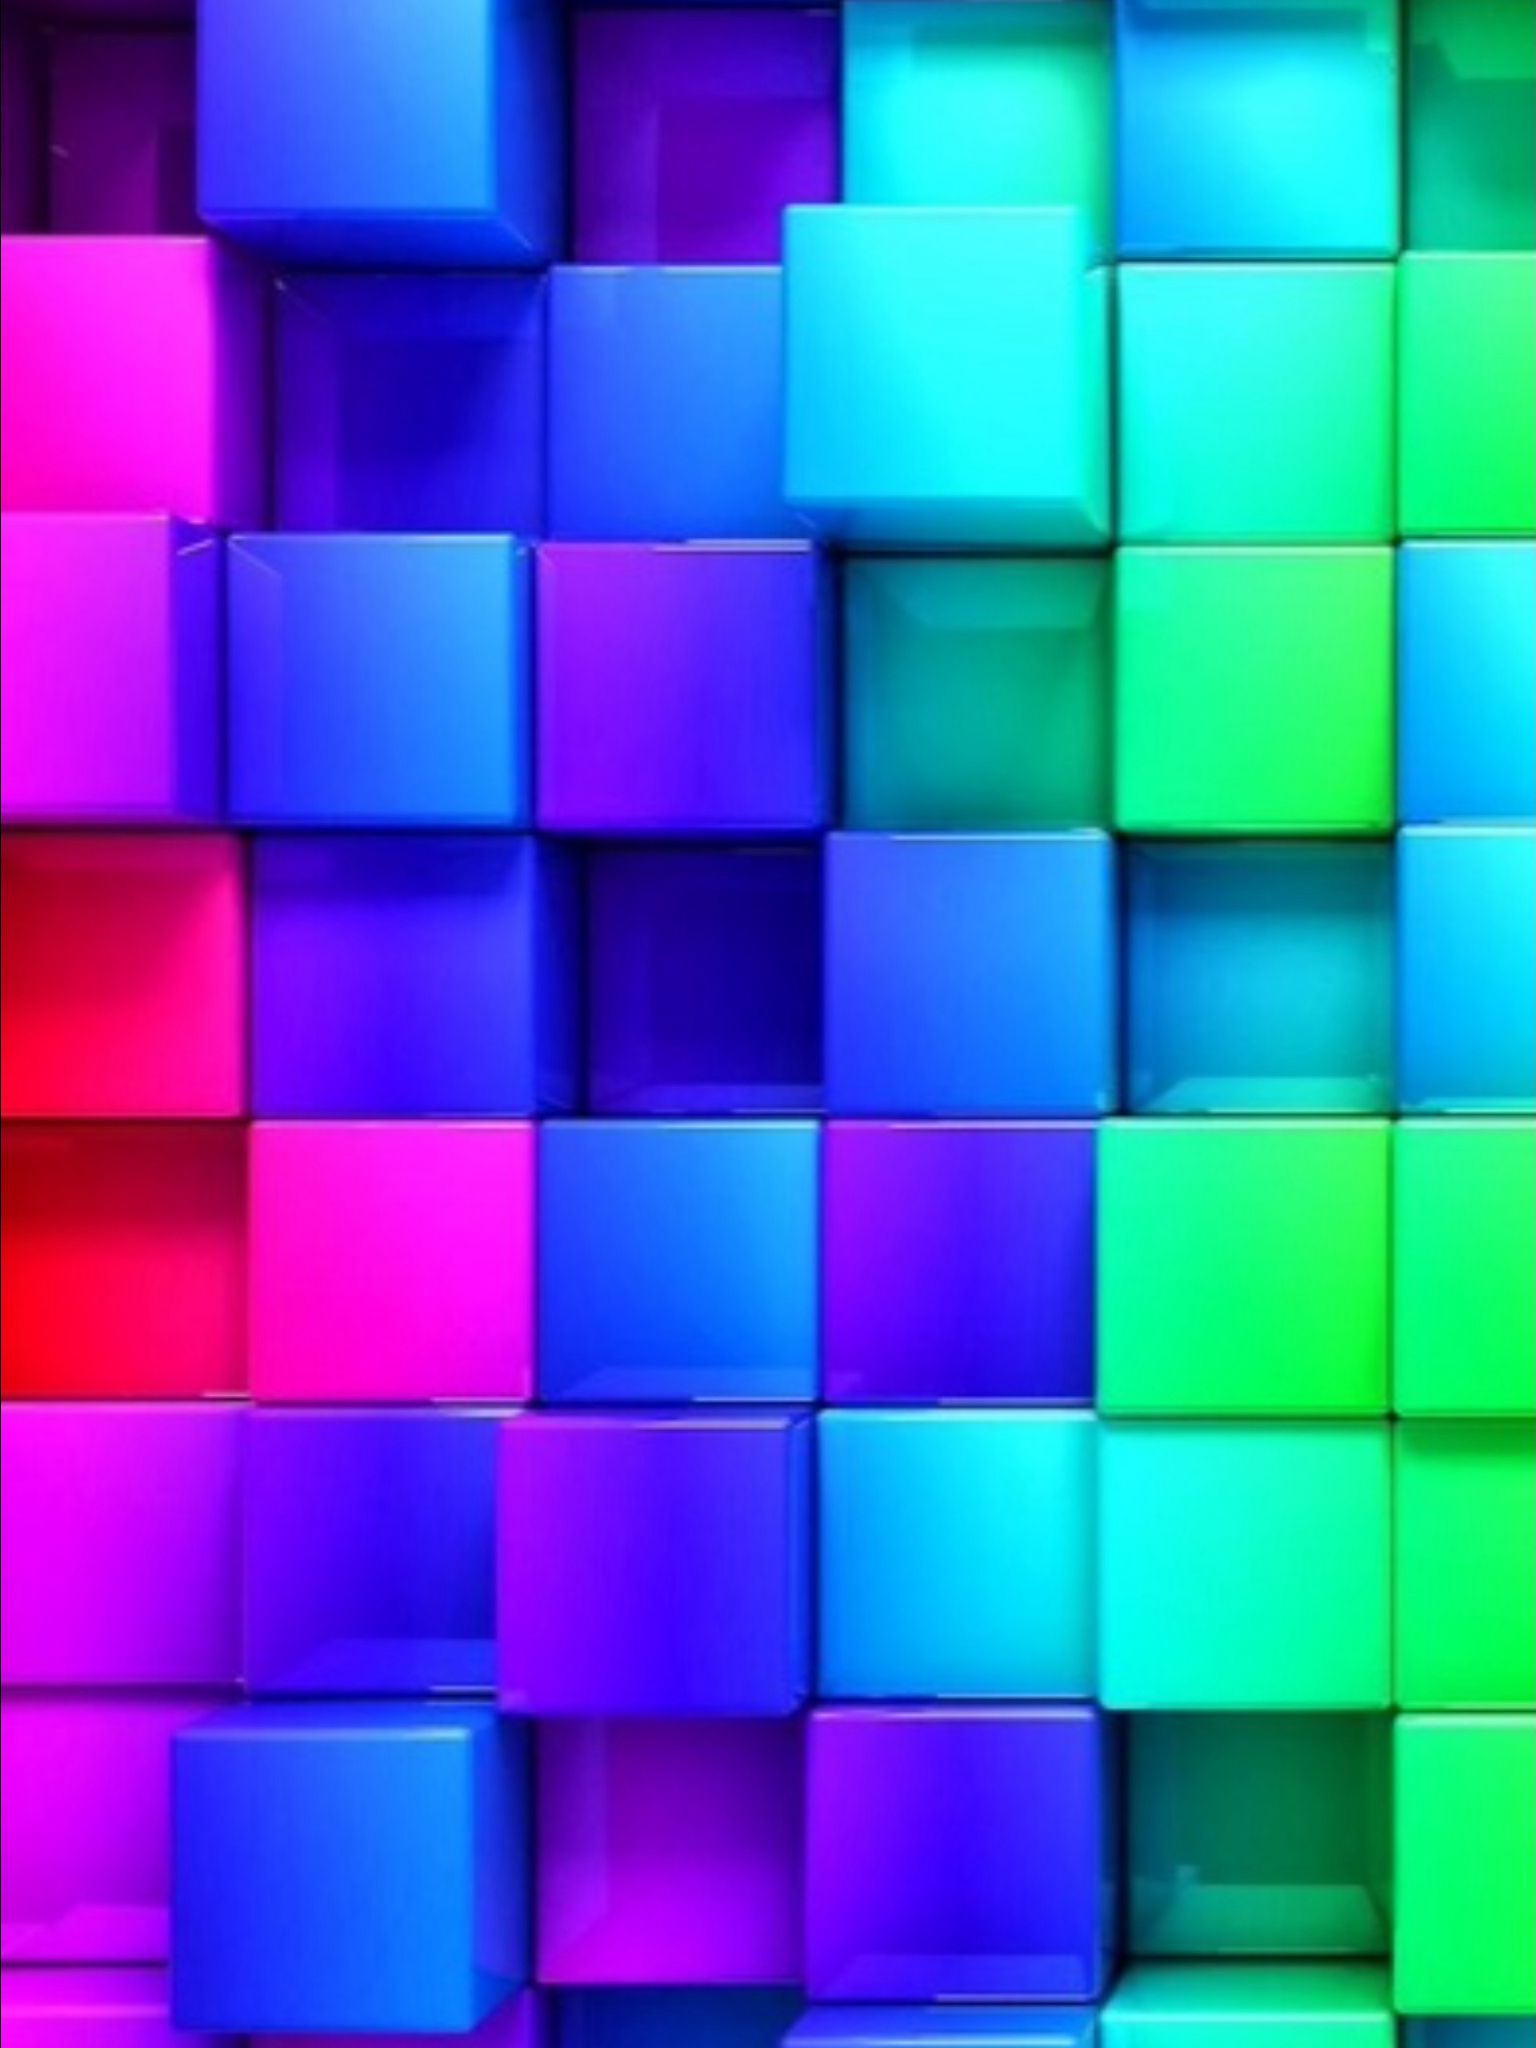 Fading in colour with 3D cubes. Colorful wallpaper, Neon wallpaper, iPhone wallpaper